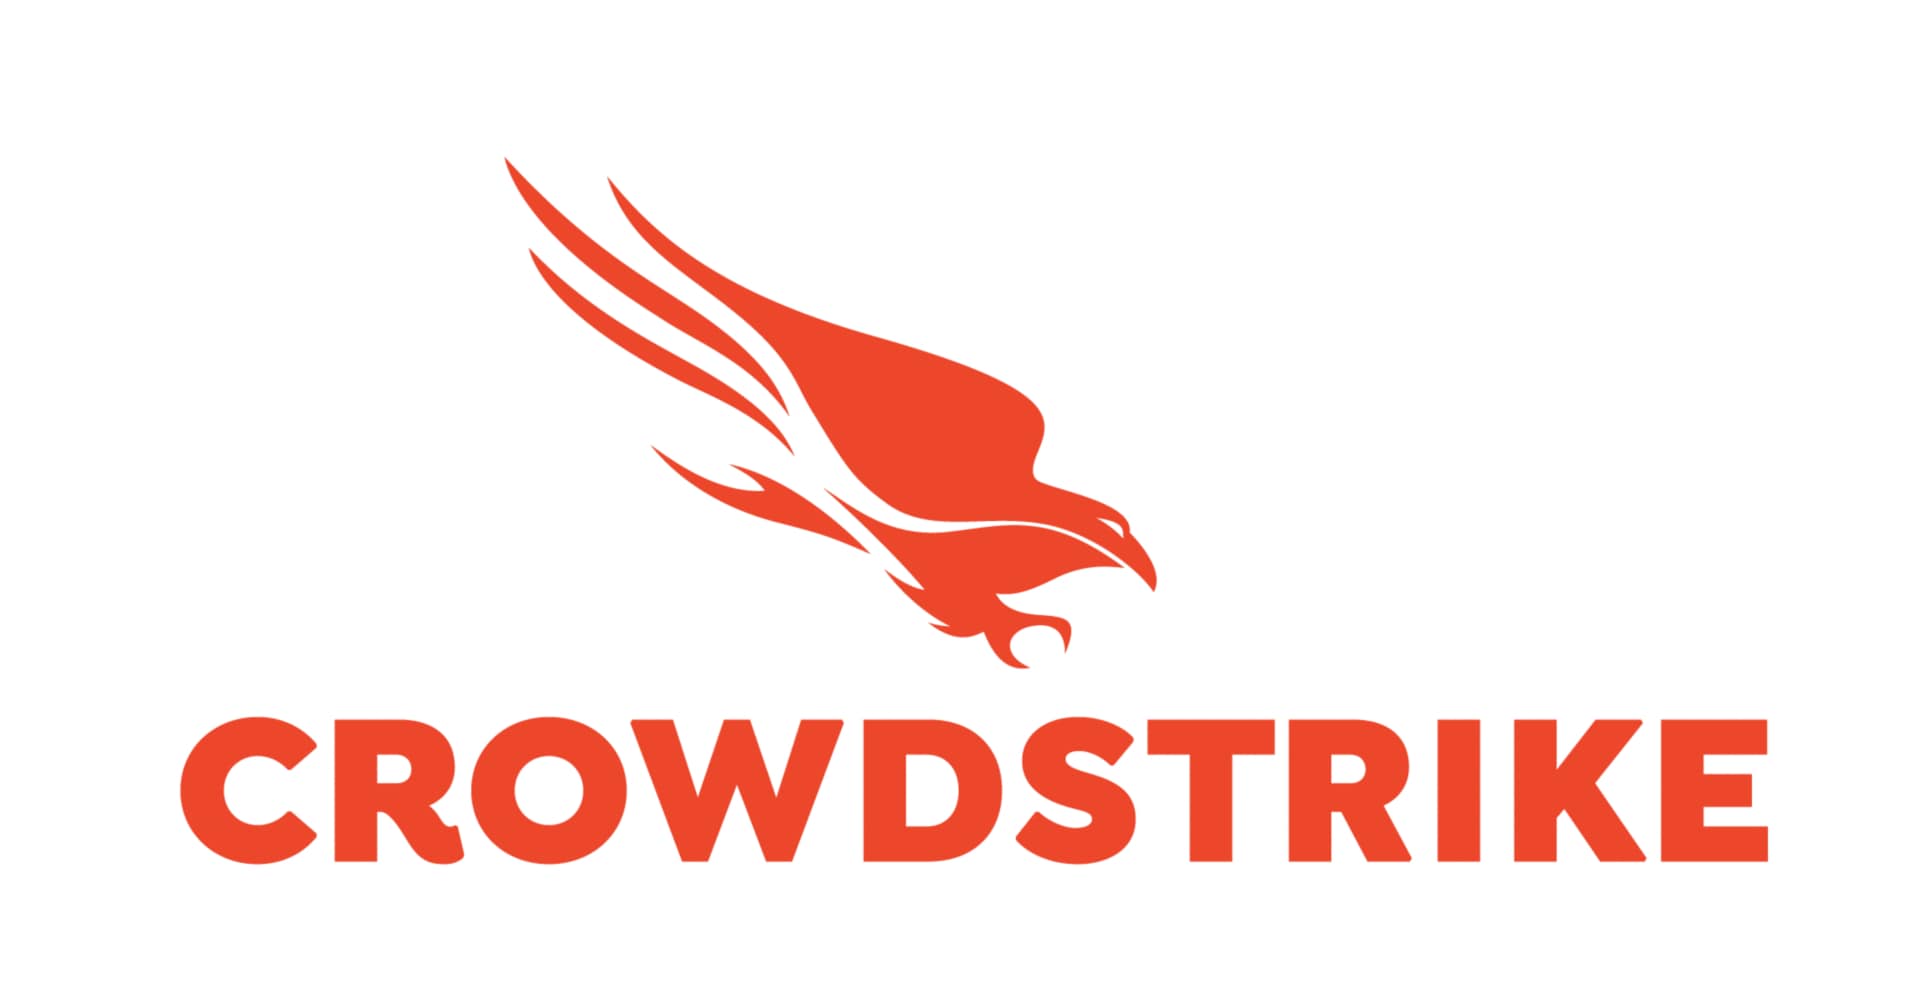 CrowdStrike Falcon Overwatch Service (5,000-9,999 Licenses)